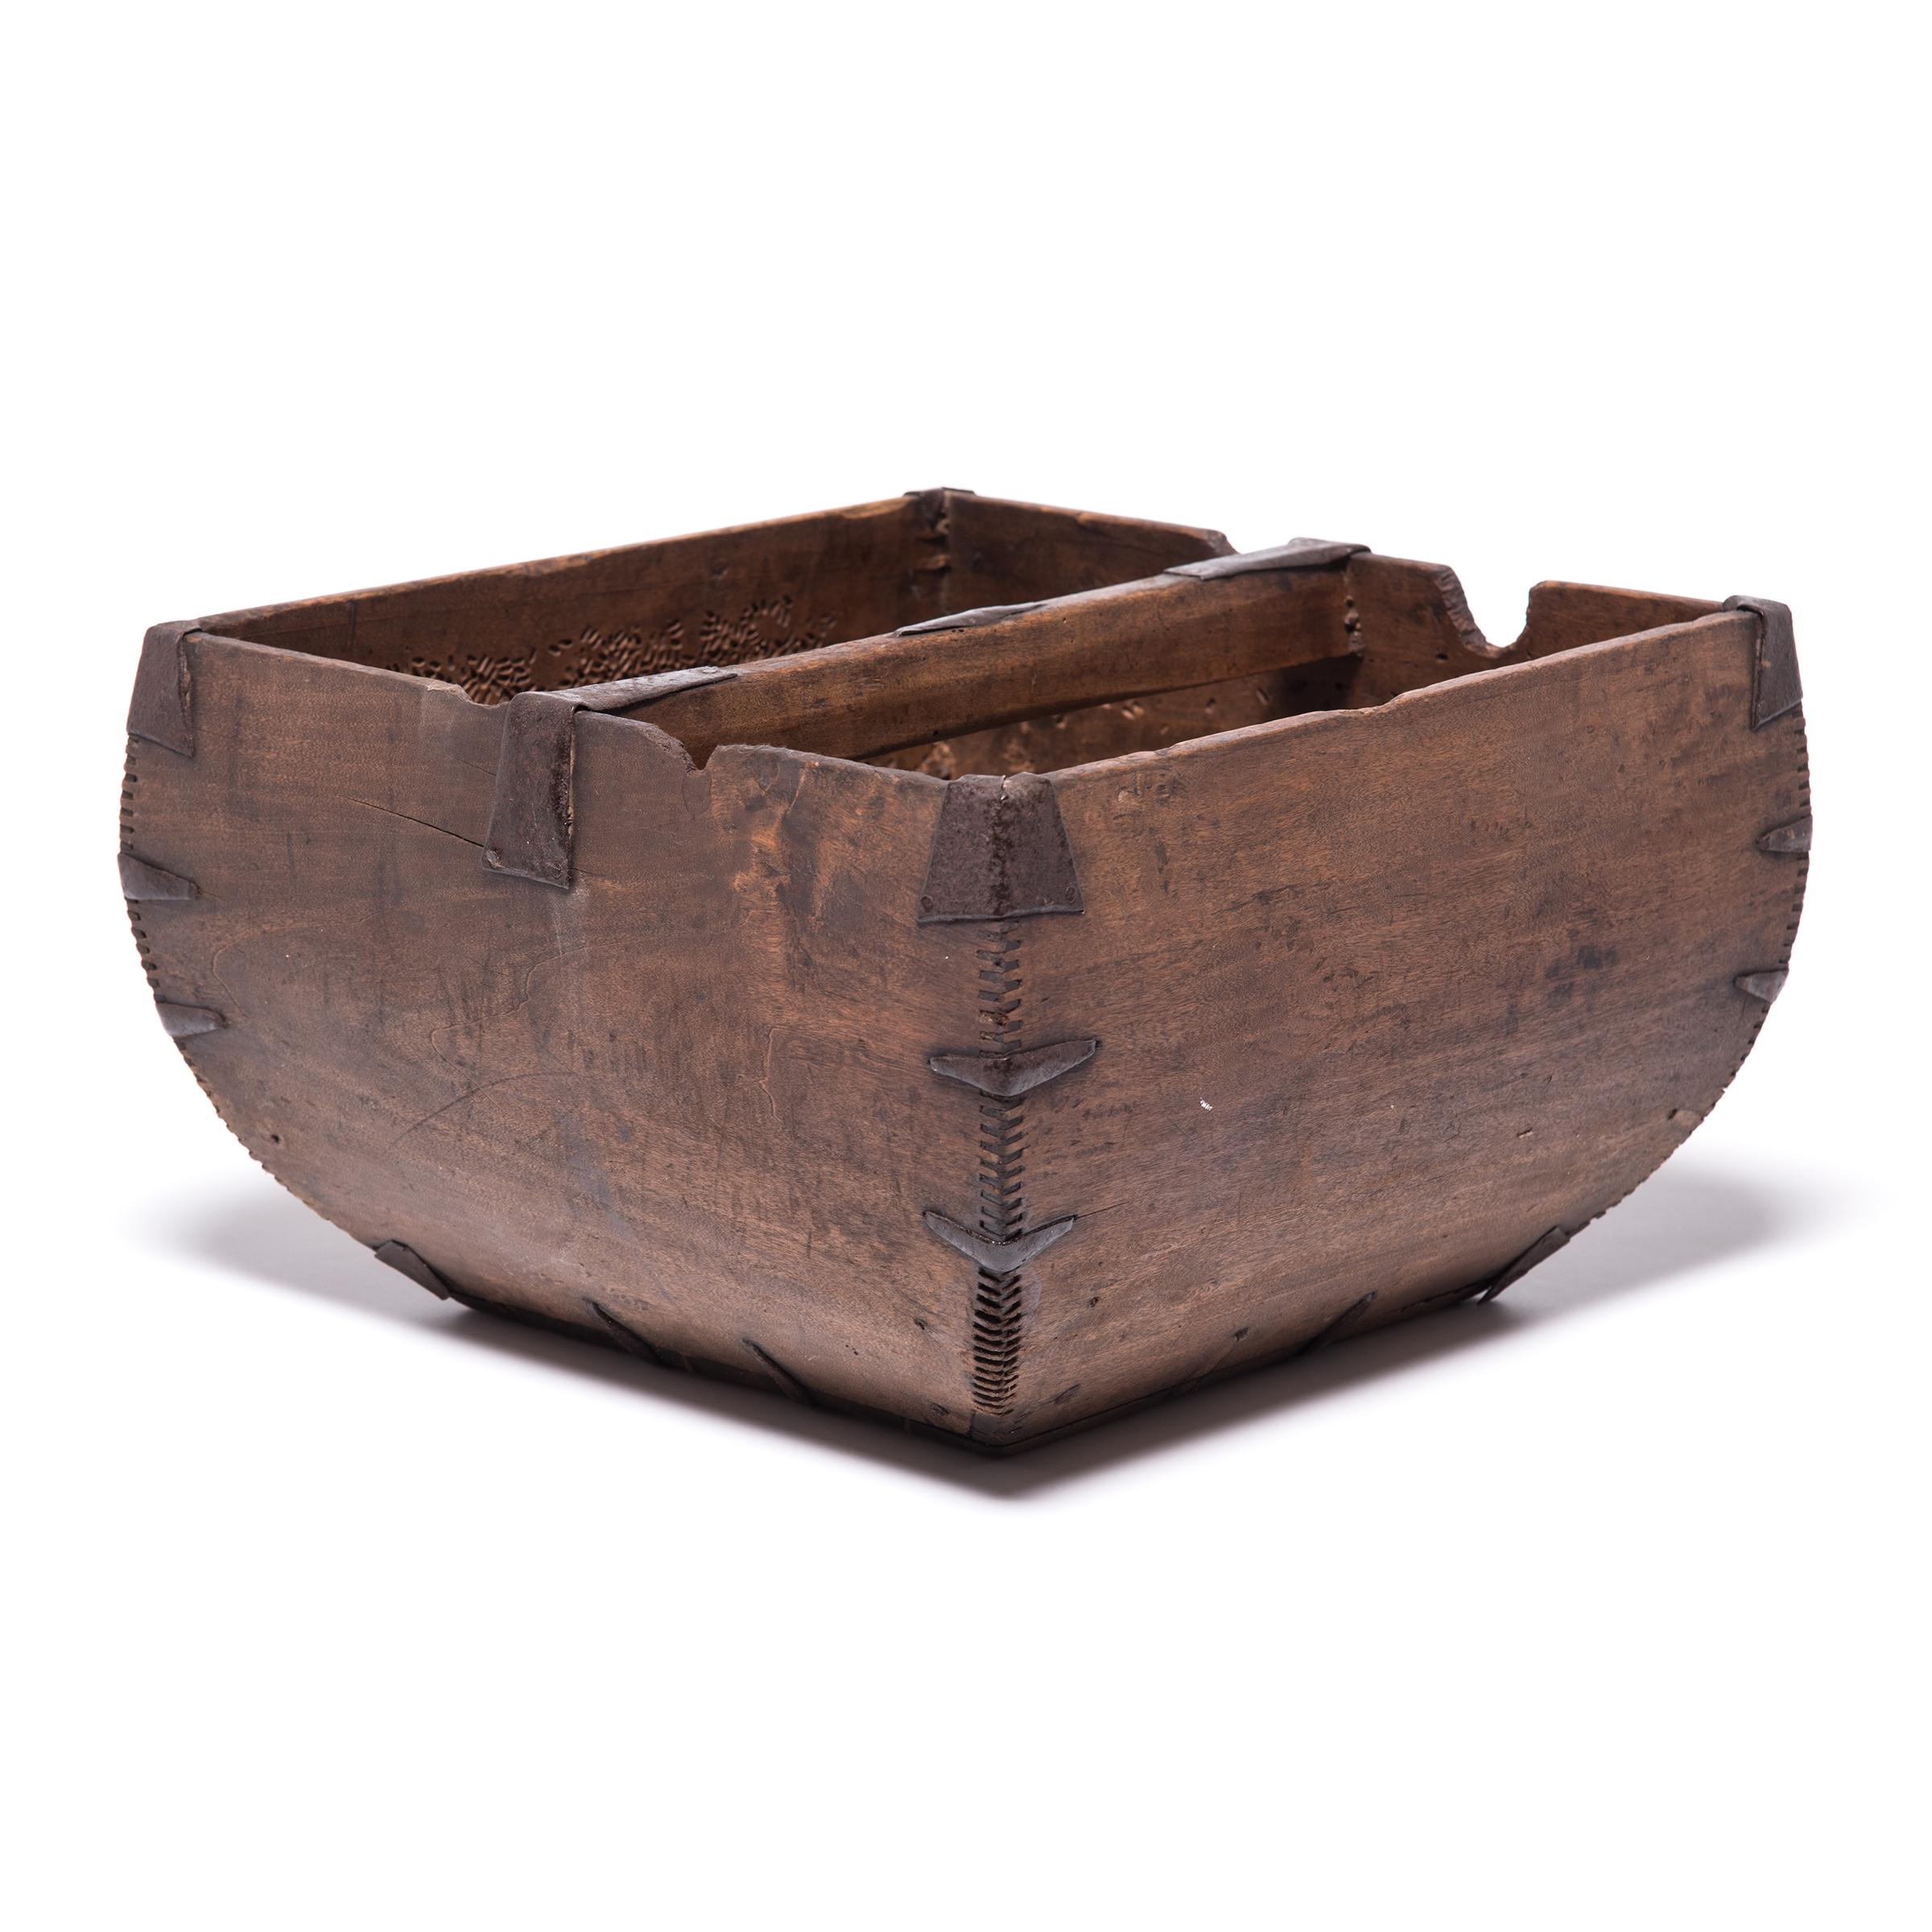 This rustic container was made over a hundred years ago to measure and hold a dou of rice, an ancient Chinese measurement. Hand-crafted with dovetail joints, the vessel has gracefully swelling sides and an arched handle, burnished from years of use.